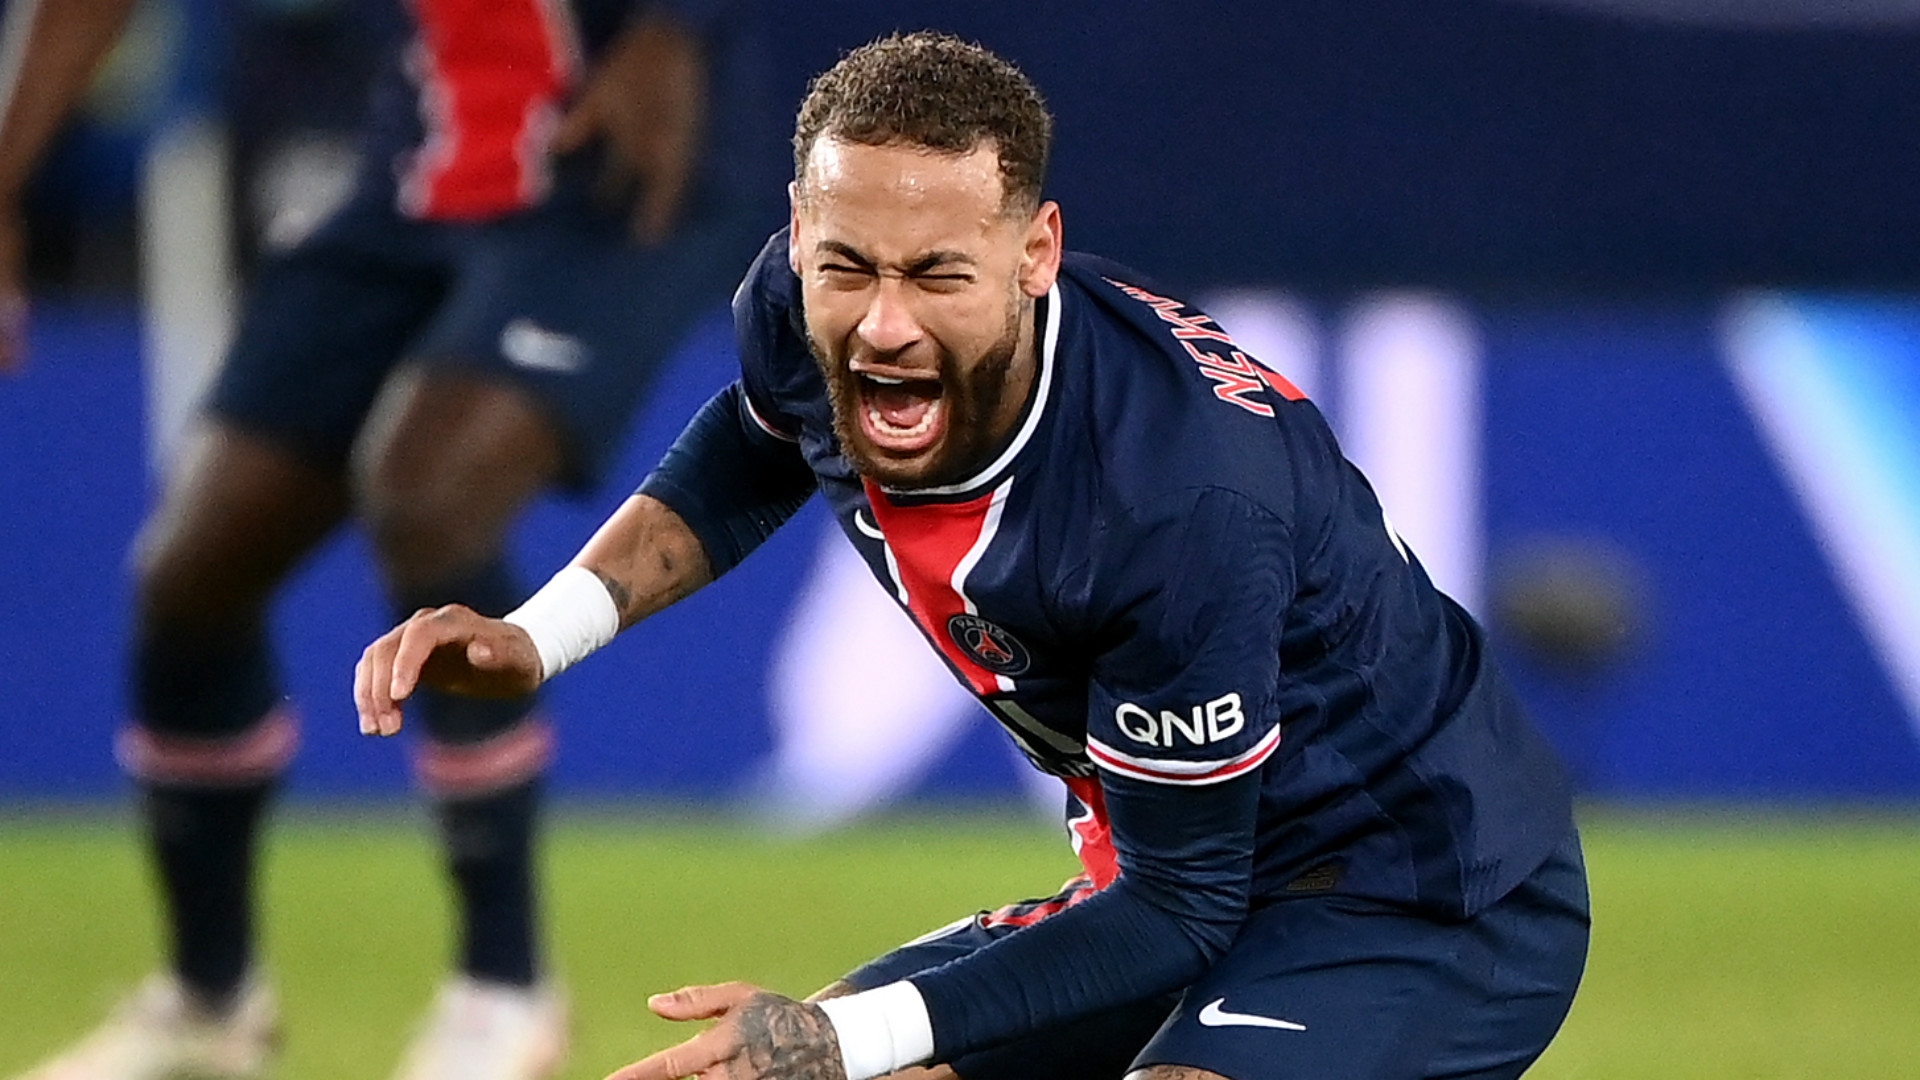 Neymar back in training after month out injured but PSG star doubtful for Marseille clash